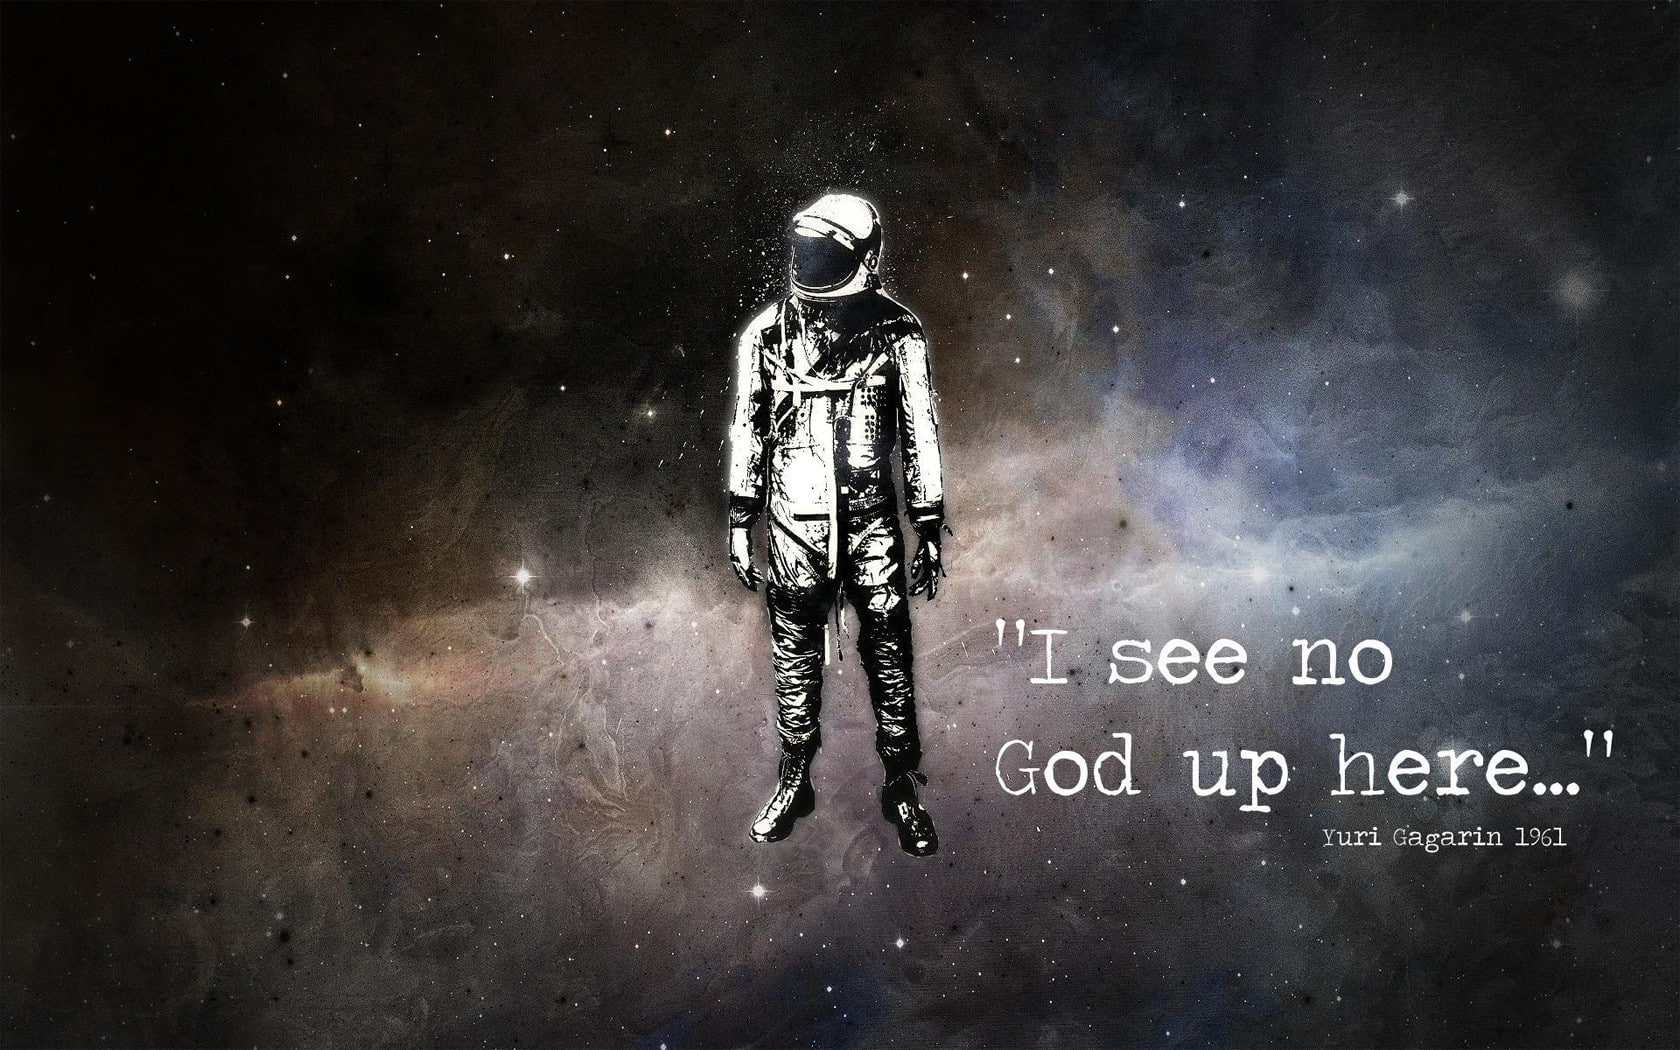 quote, abstract, astronaut, atheism, space, Yuri Gagarin, Alex Cherry